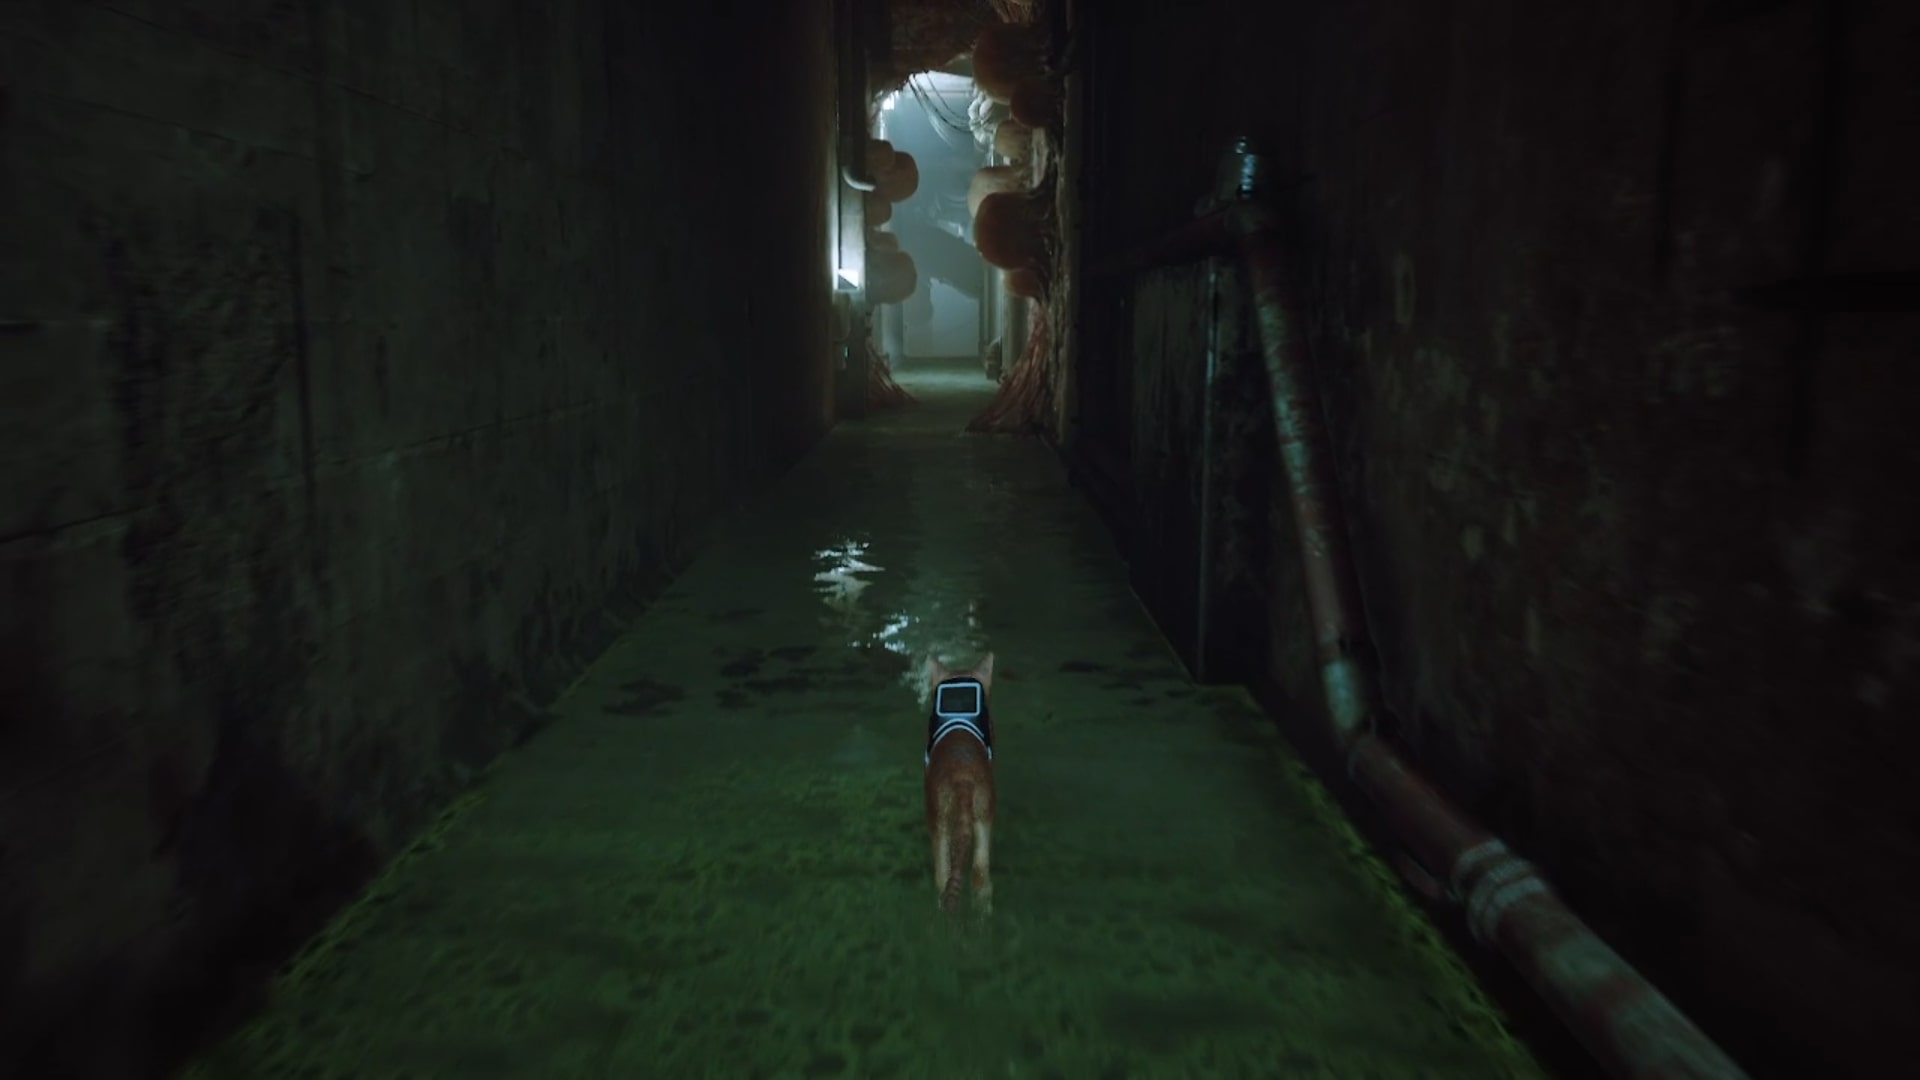 Stray memories guide: The orange tabby runs along a corridor flooded by sewage. Further along the corridor, clusters of Zurk eggs are attached to the walls, held up by strange sinewy flesh